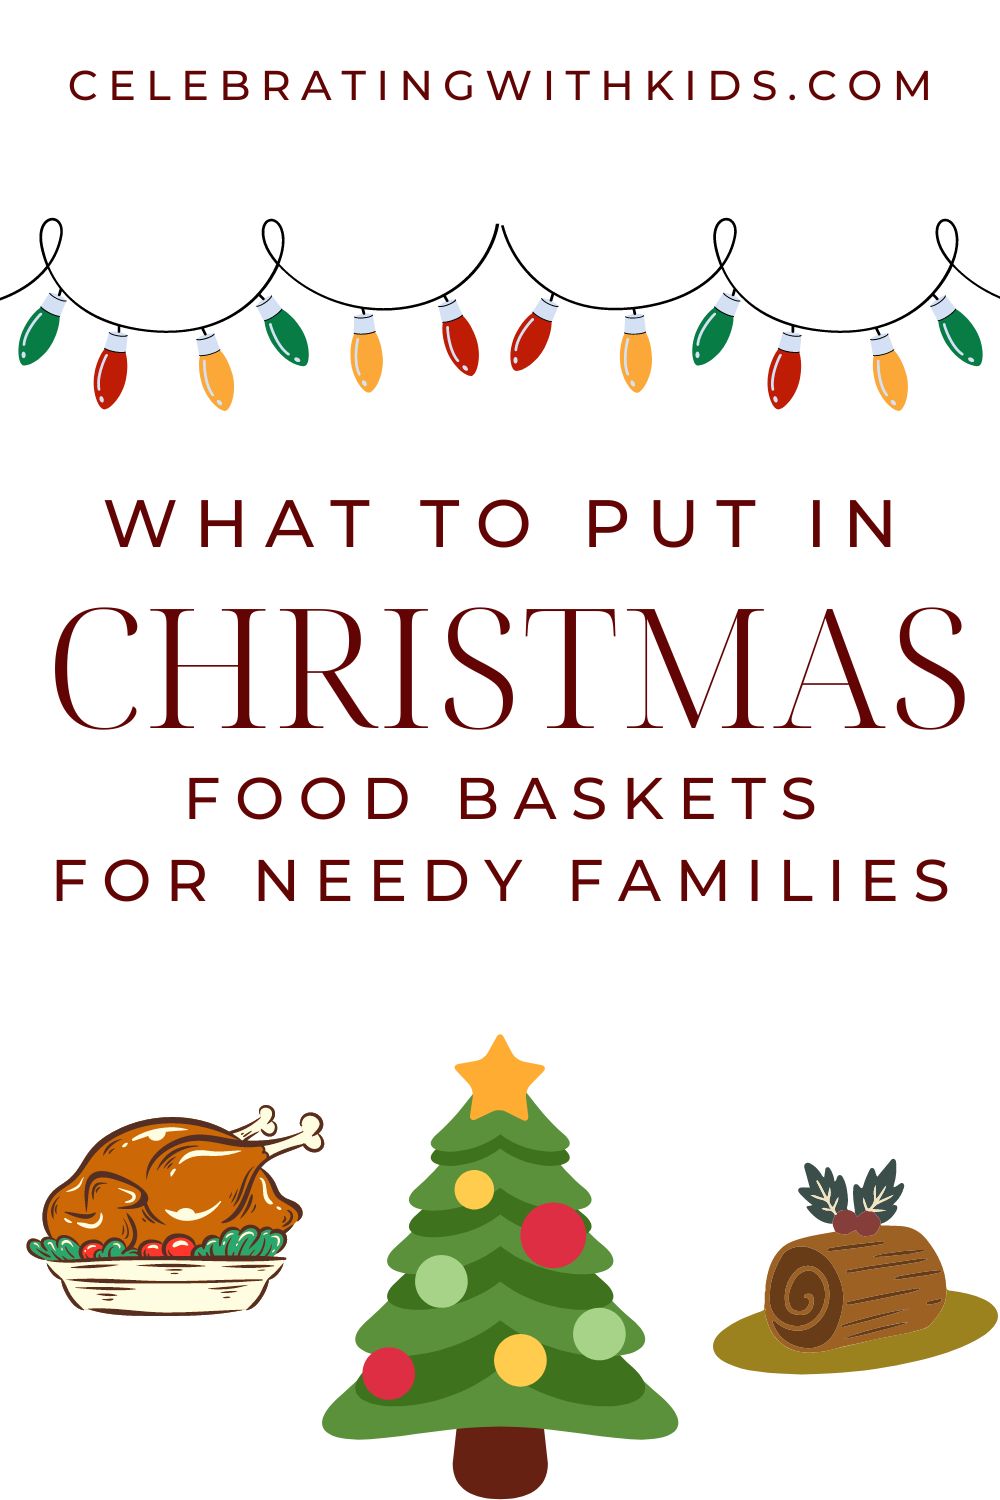 How to make Christmas food hampers for needy families